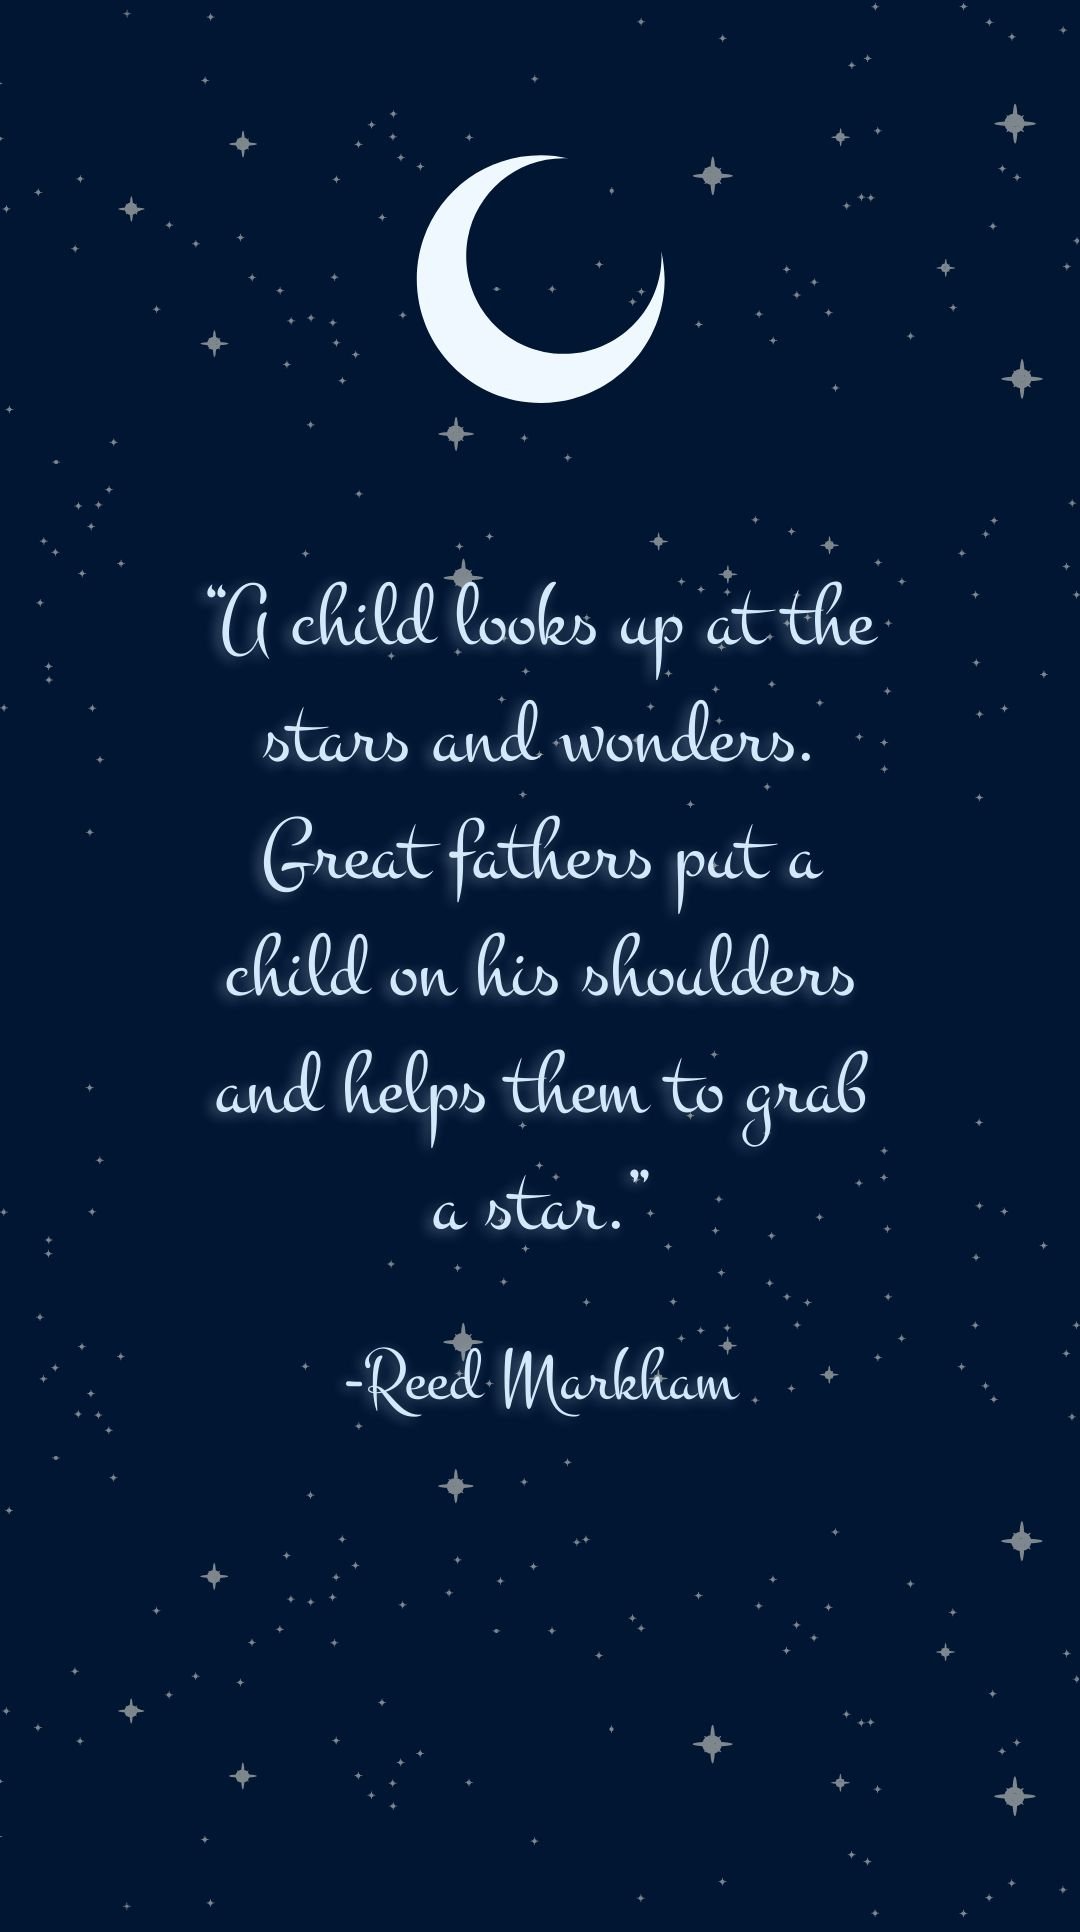 Free Reed Markham - A child looks up at the stars and wonders. Great fathers put a child on his shoulders and helps them to grab a star.